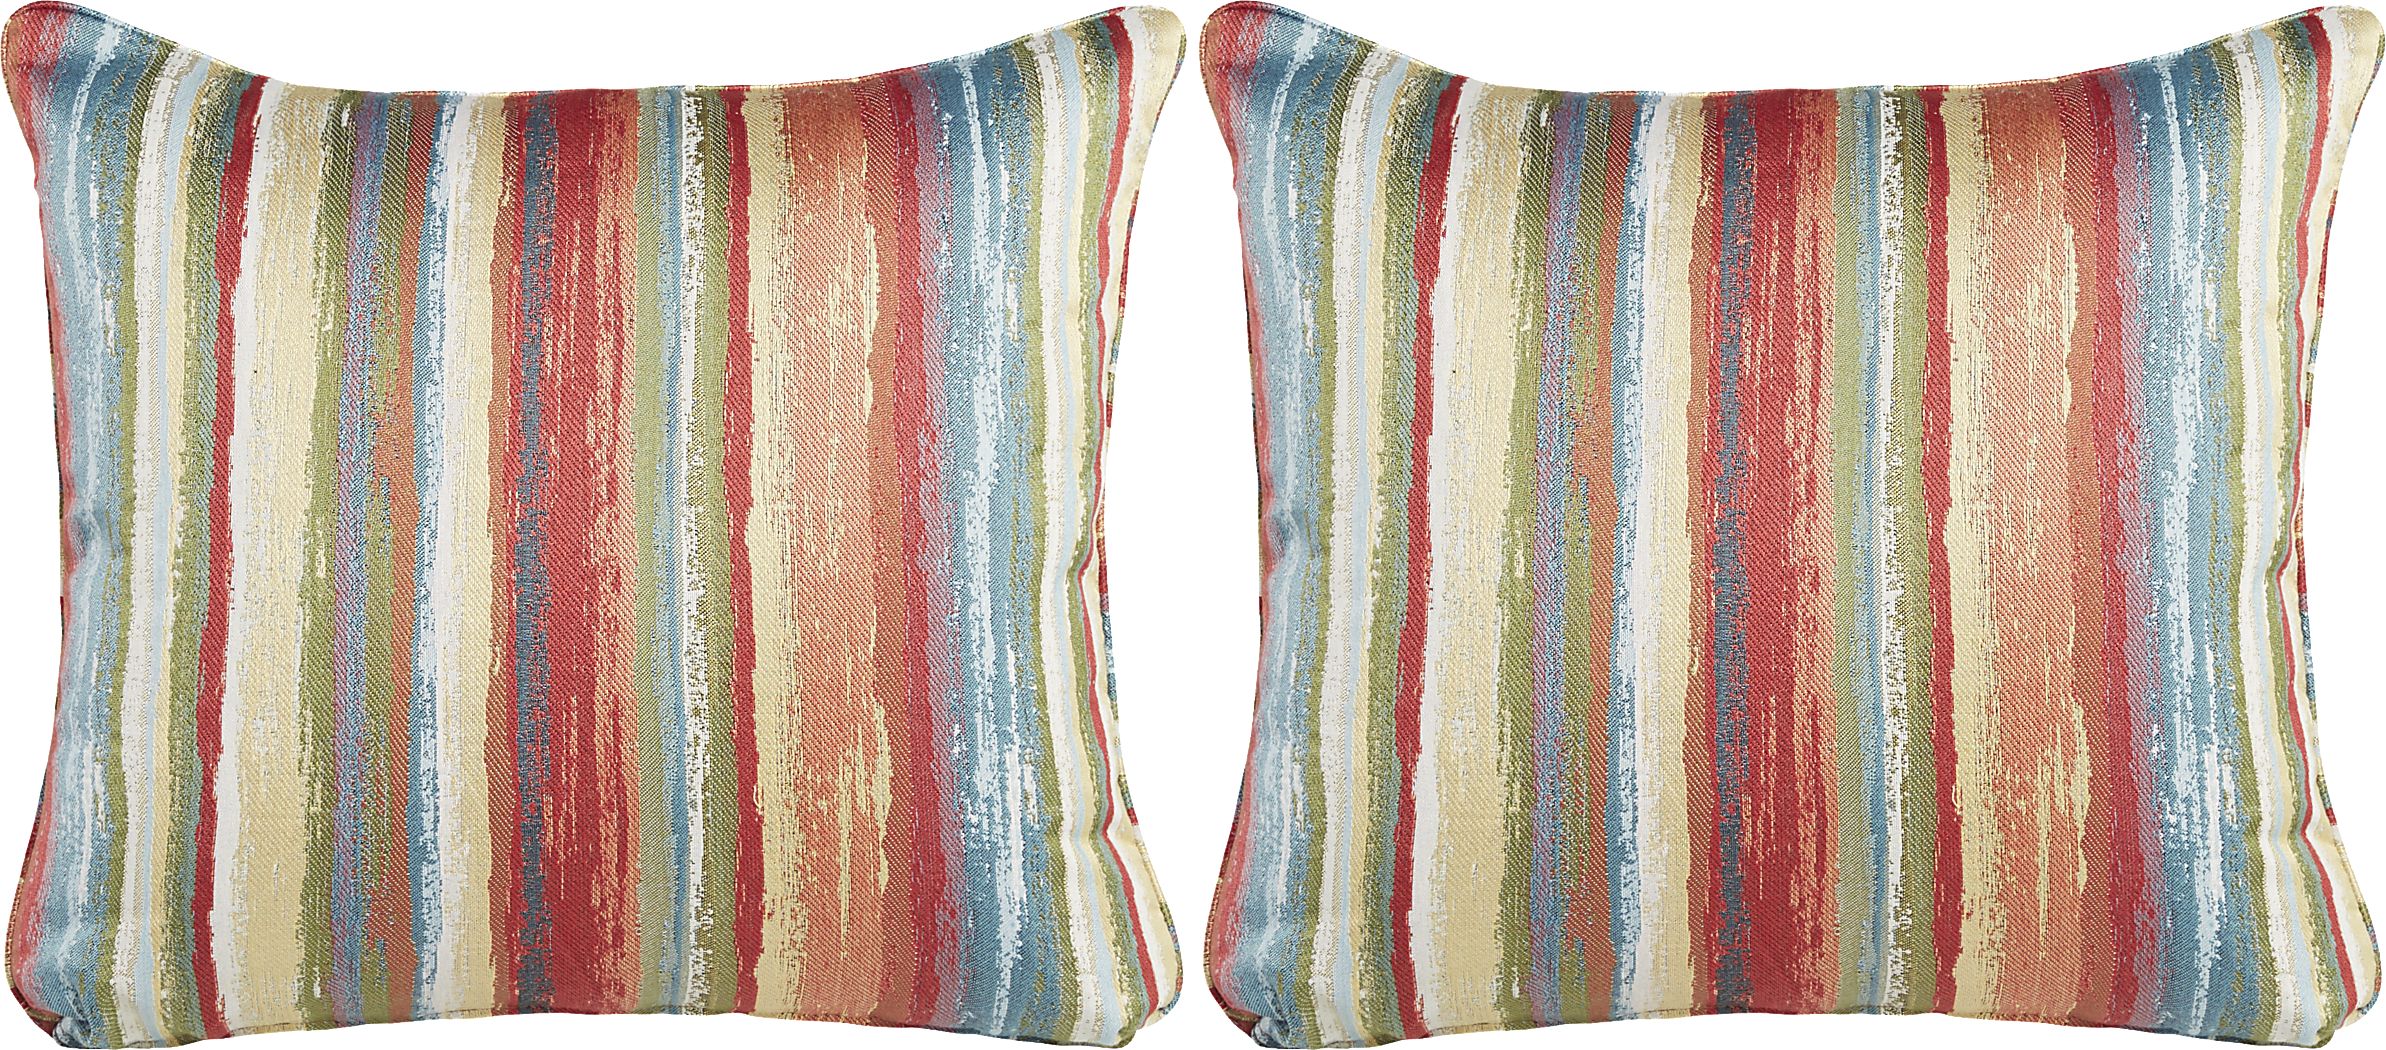 https://assets.roomstogo.com/product/isofa-painterly-stripe-accent-pillows-set-of-2_18990881_image-item?cache-id=48584f917dd8aa6d8f4b216c571457e2